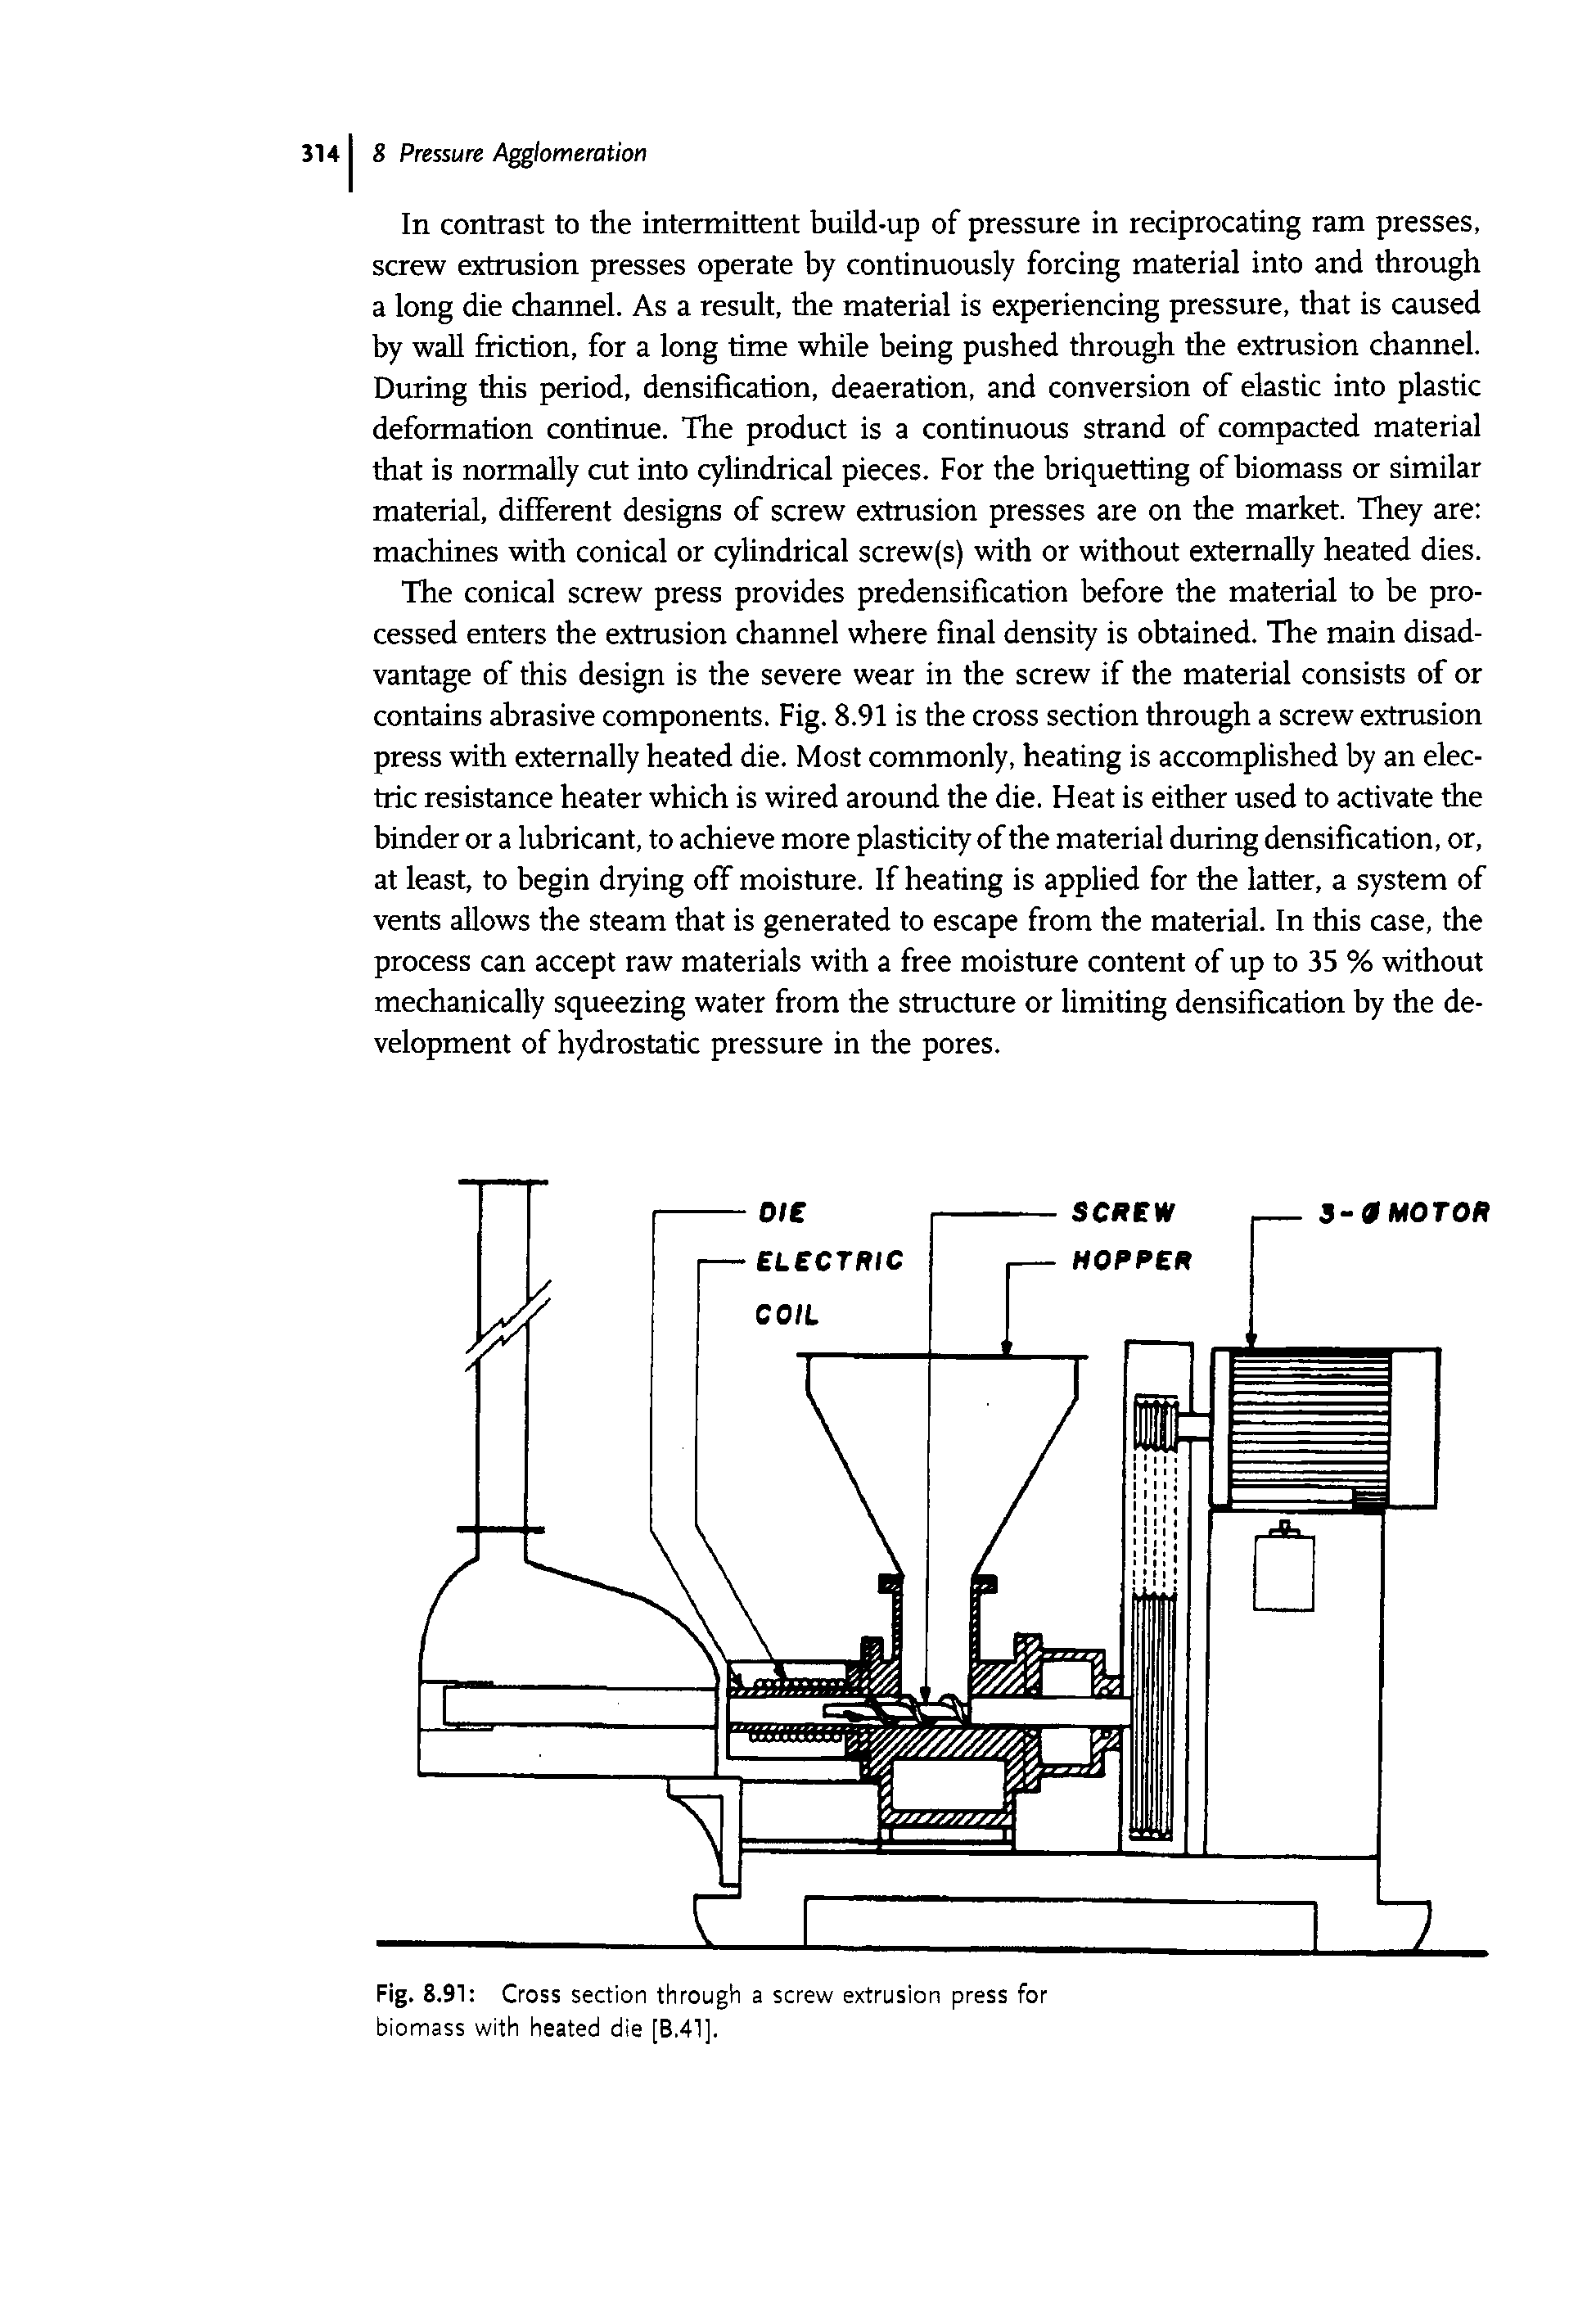 Fig. 8.91 Cross section through a screw extrusion press for biomass with heated die [B.41].